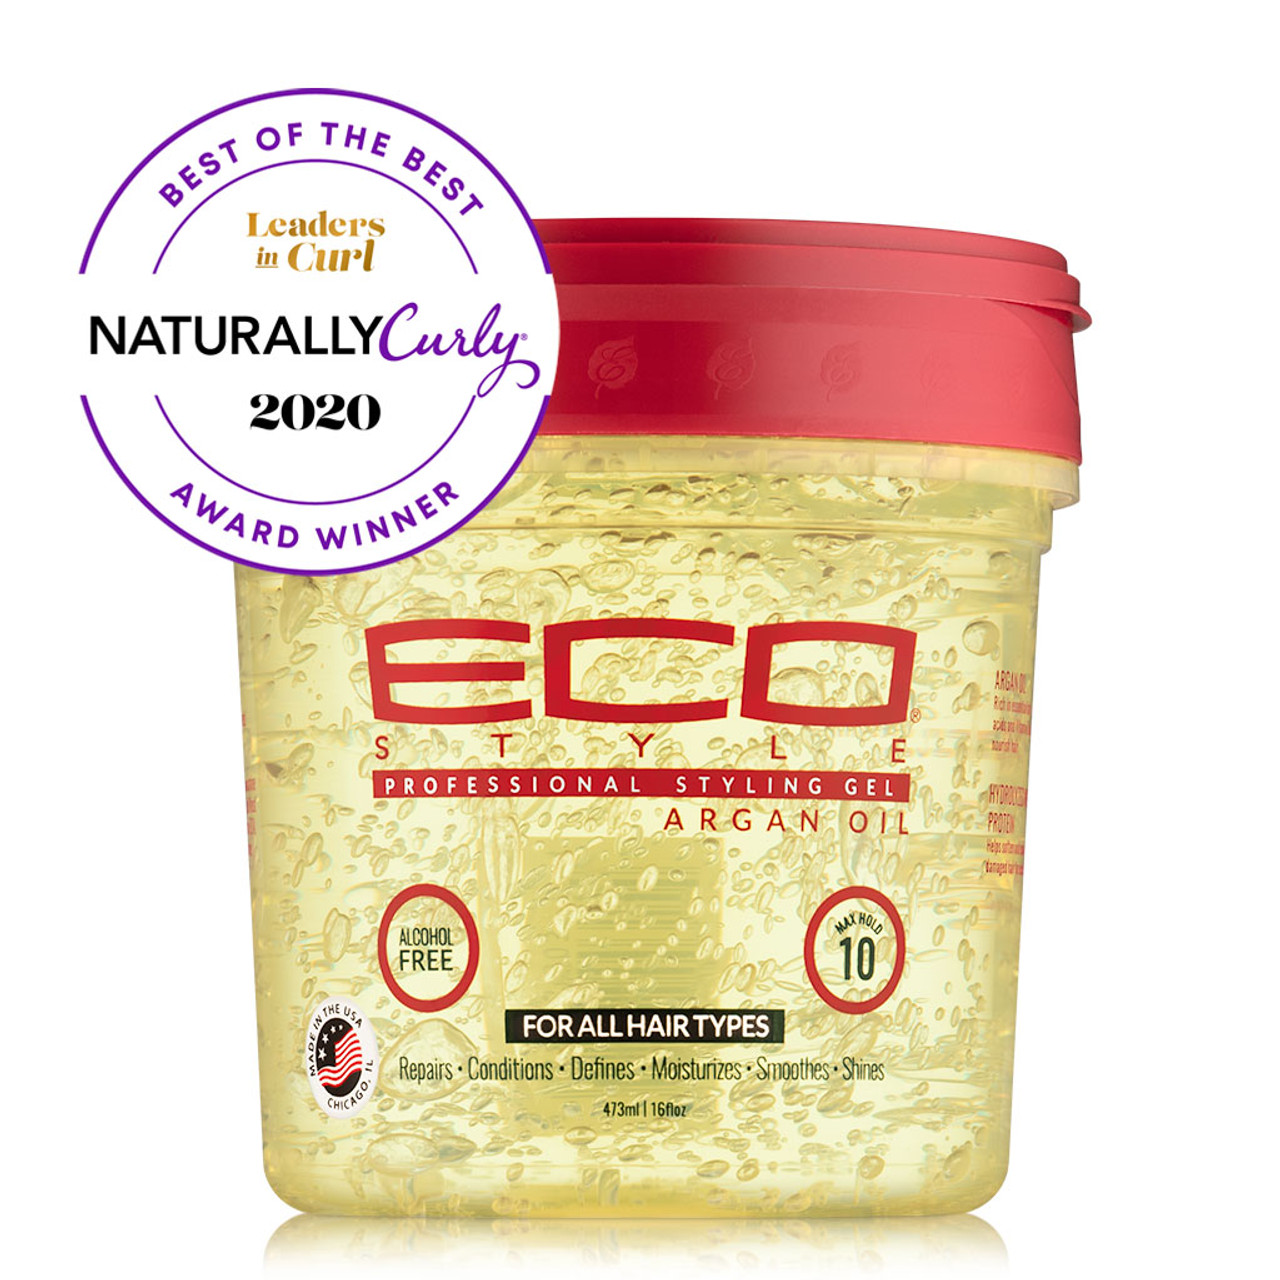 Ecoco Eco Styler Professional Styling Gel with Argan Oil (16 oz.)